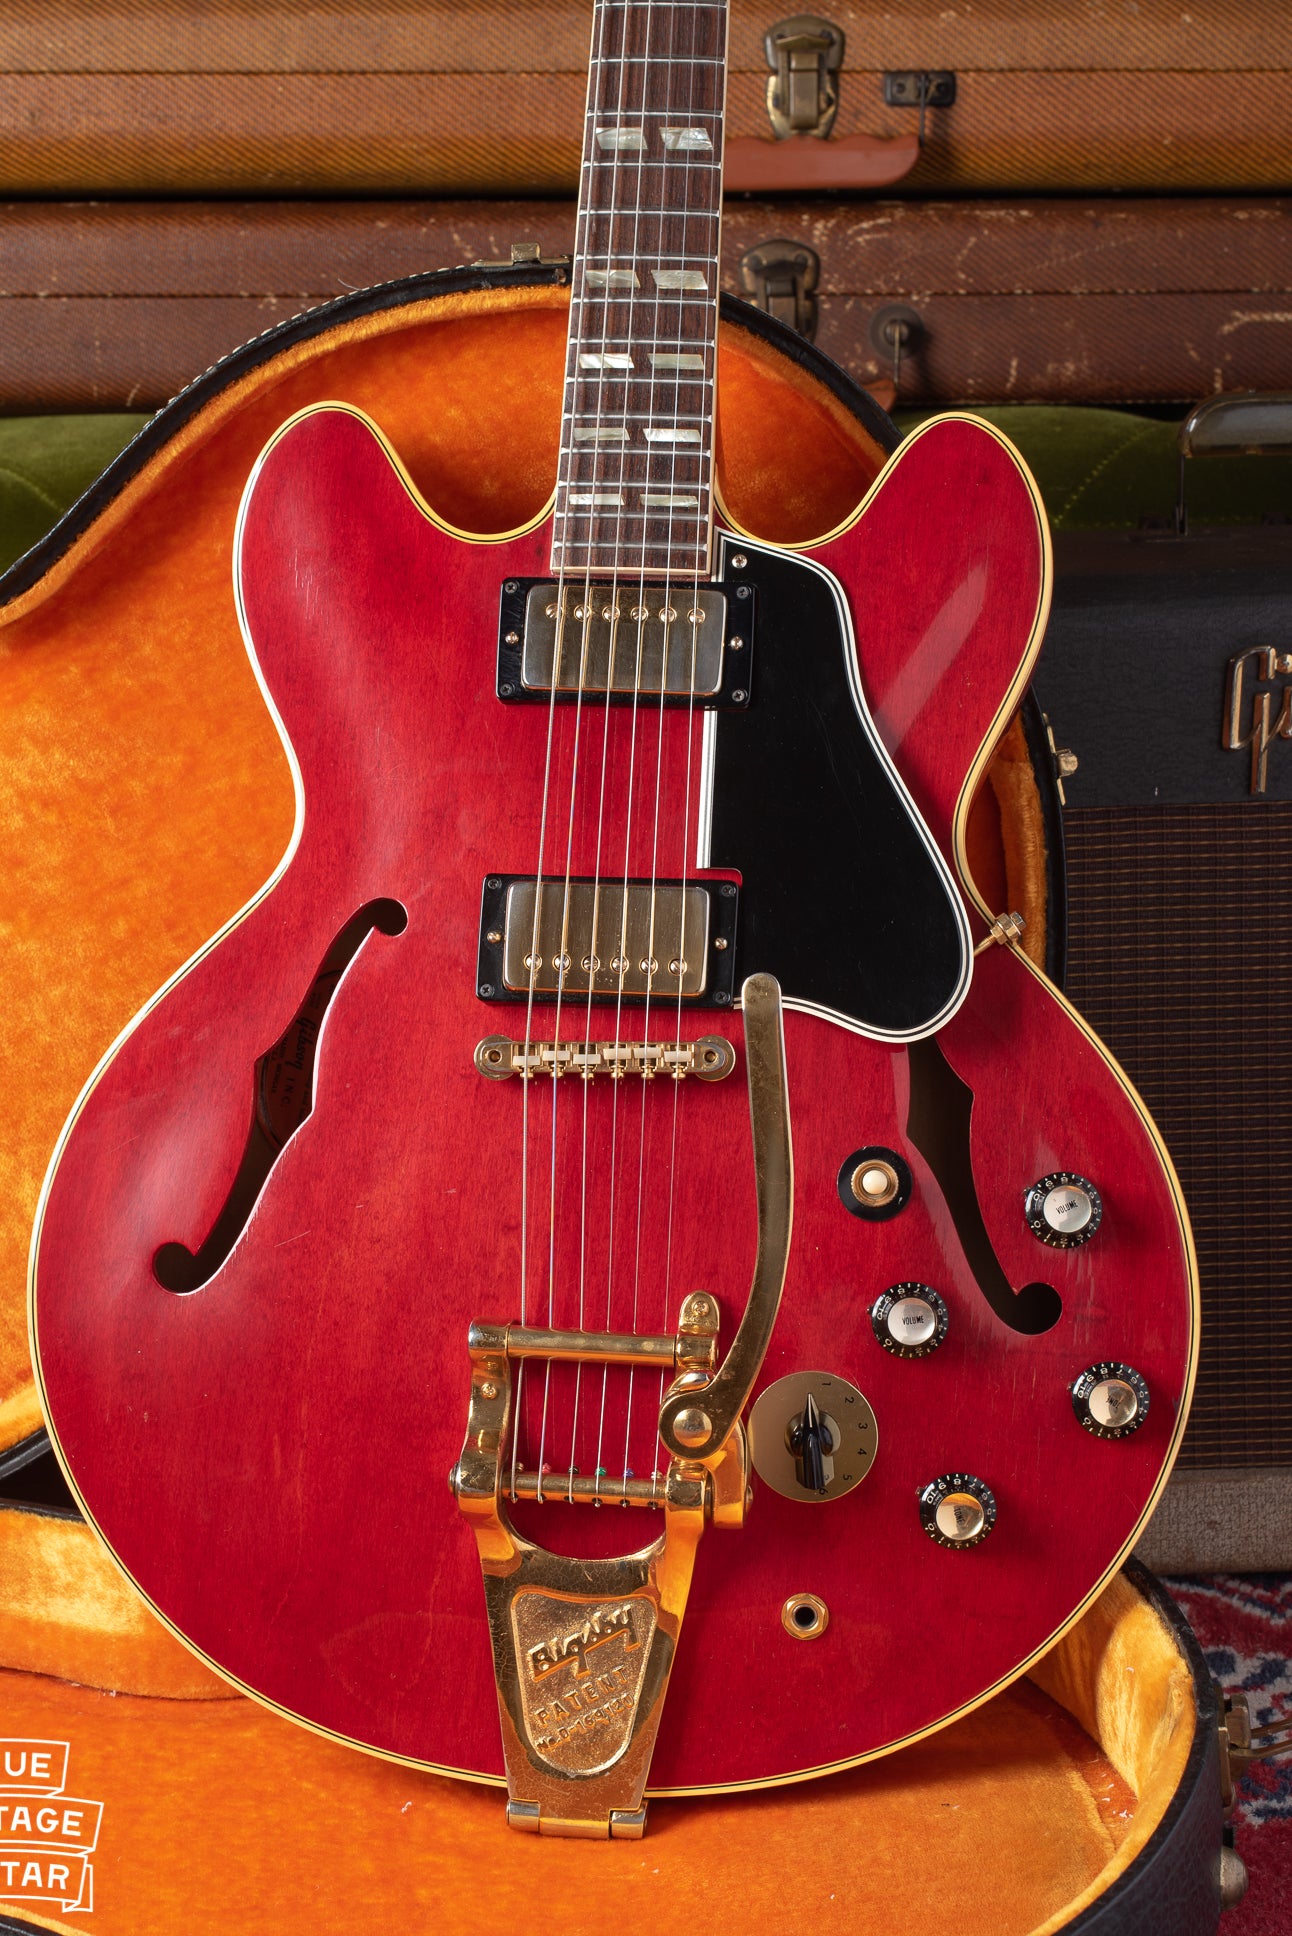 Gibson ES-345 1966 red guitar with gold parts